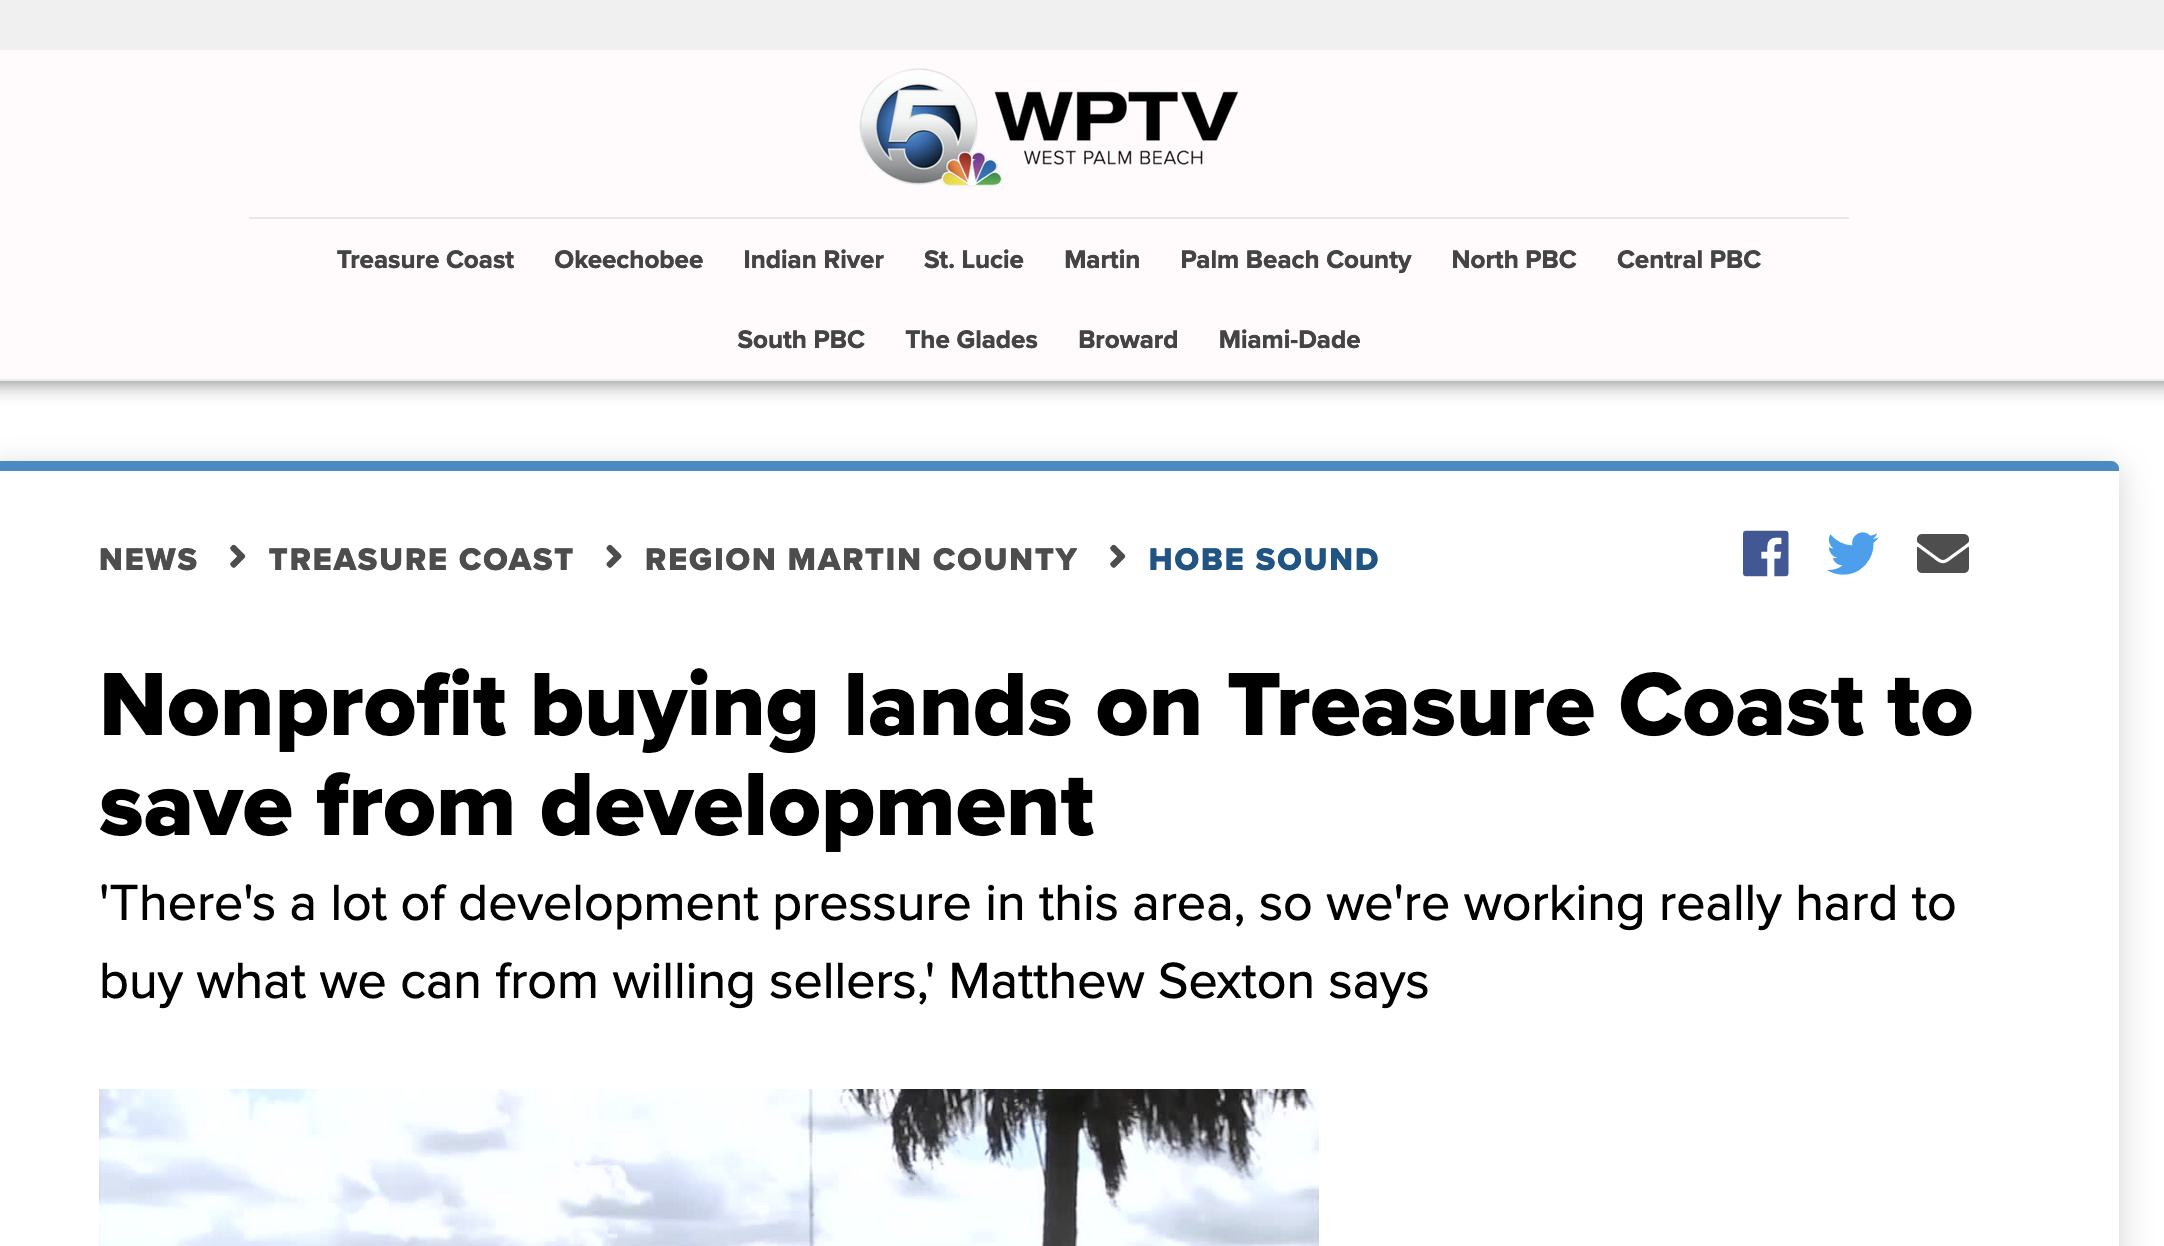 Nonprofit buying lands on Treasure Coast to save from development